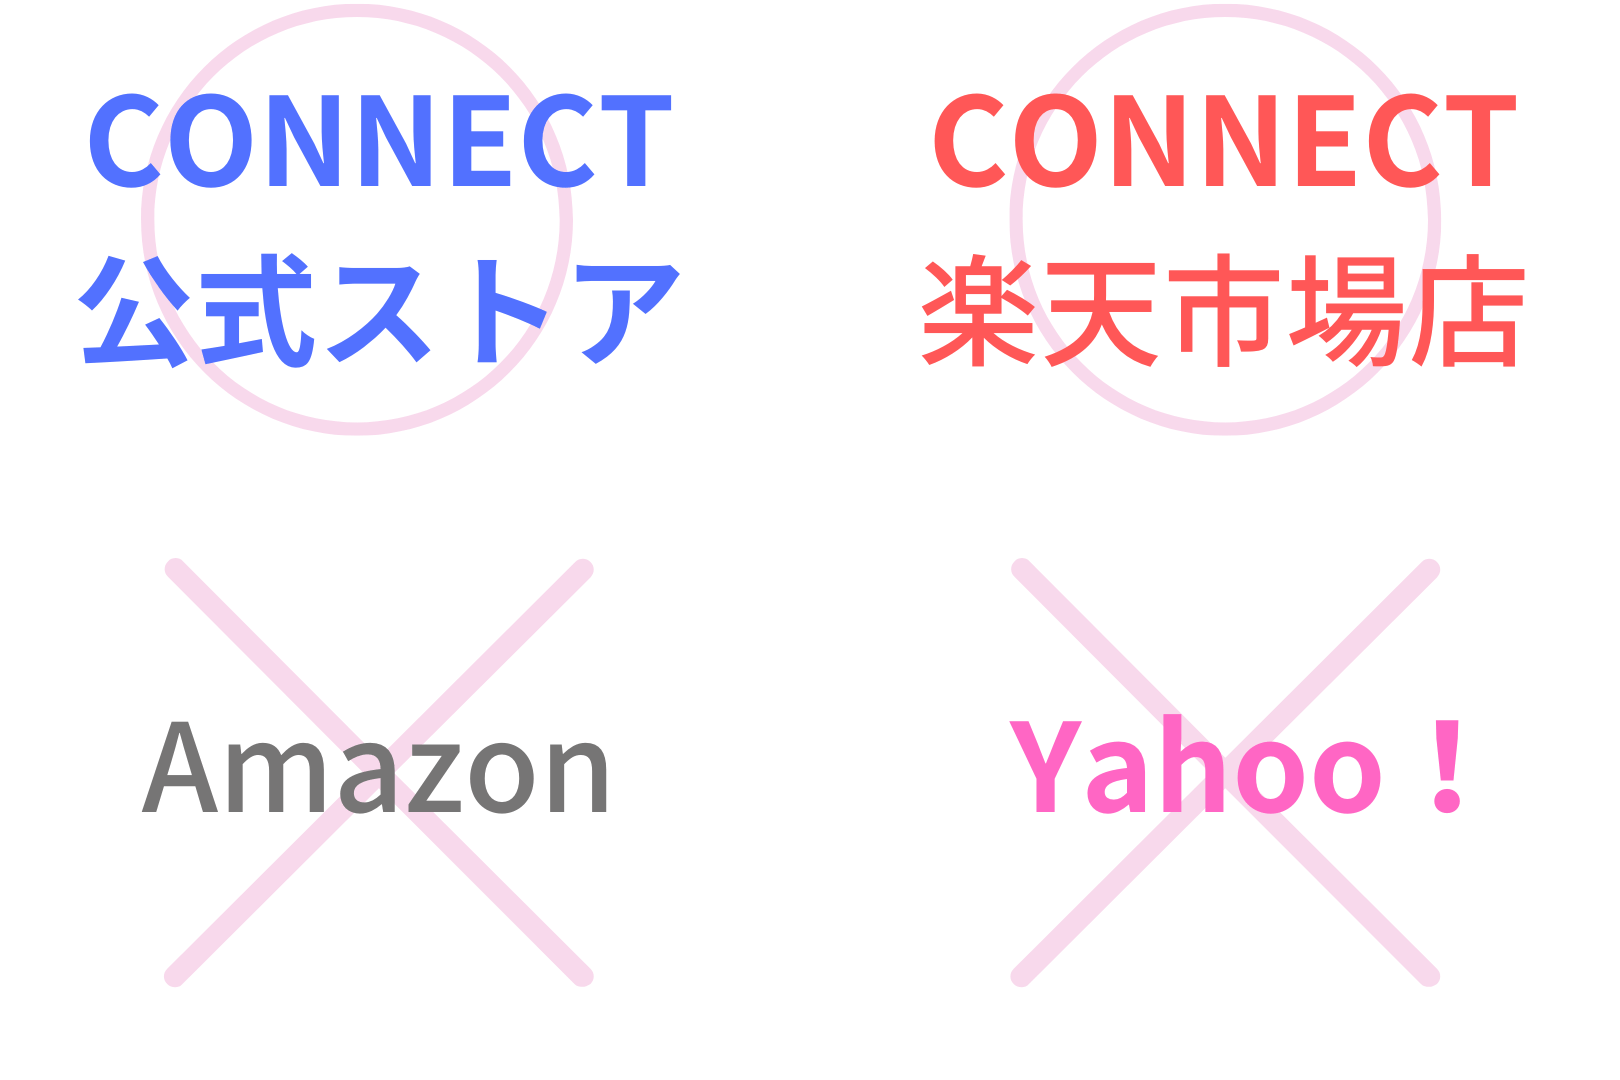 CONNECT 購入